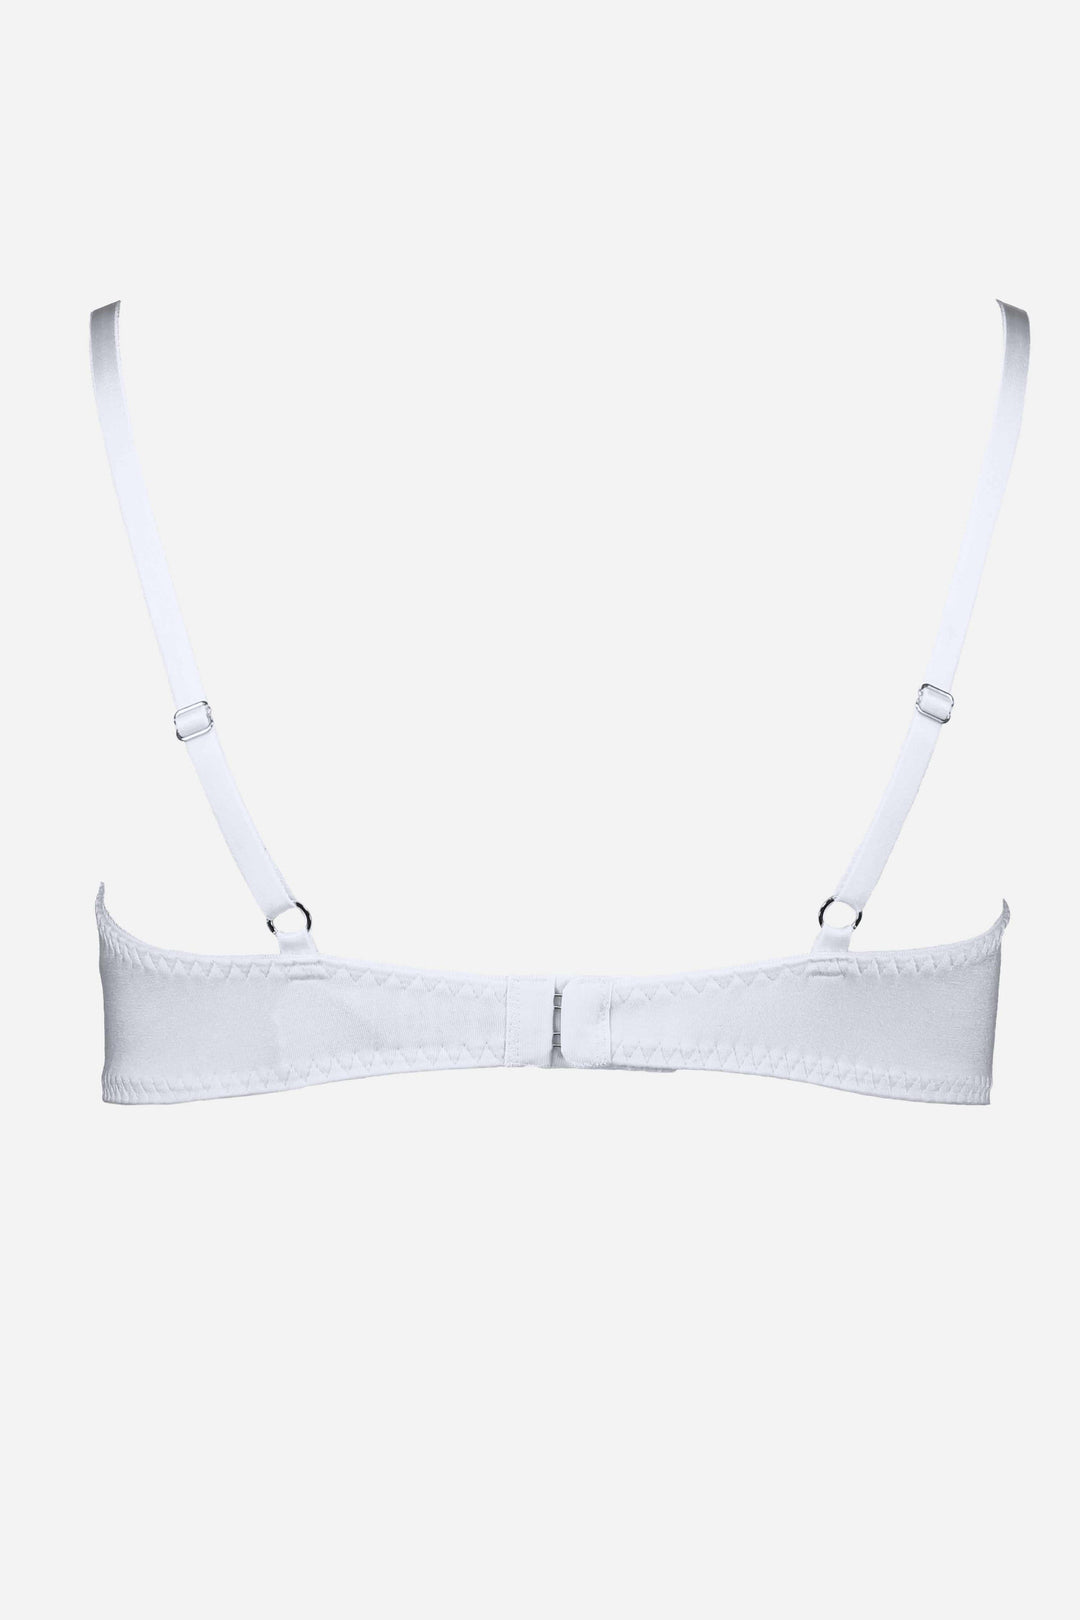 Videris Lingerie Angela soft cup bra in white TENCEL™ features adjustable straps and hook and eyes at the back